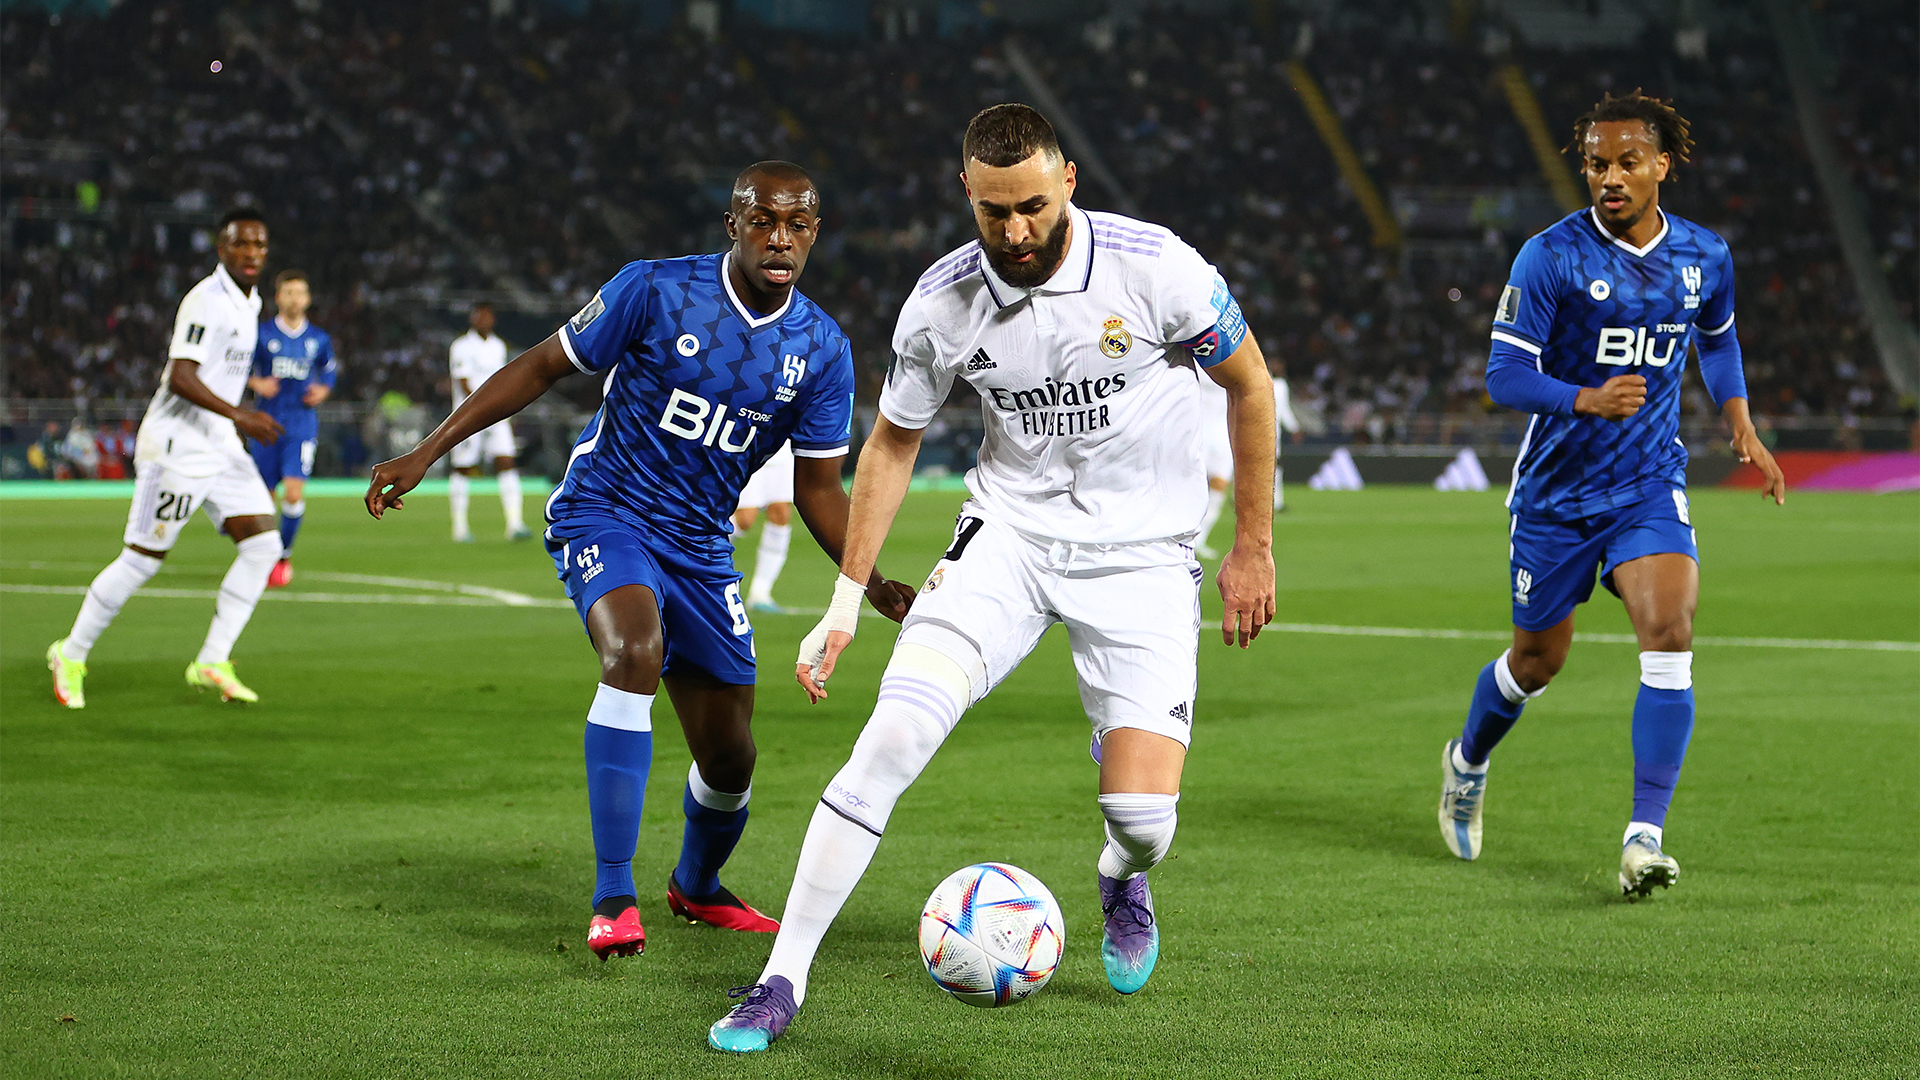 Real Madrid Info ³⁵ on X: REAL MADRID CHAMPIONS of the World Cup 2022 Real  Madrid 5-3 Al Hilal Goals: Vini Jr x2, Valverde x2, Benzema Assists:  Benzema, Vinicius, Carvajal  /